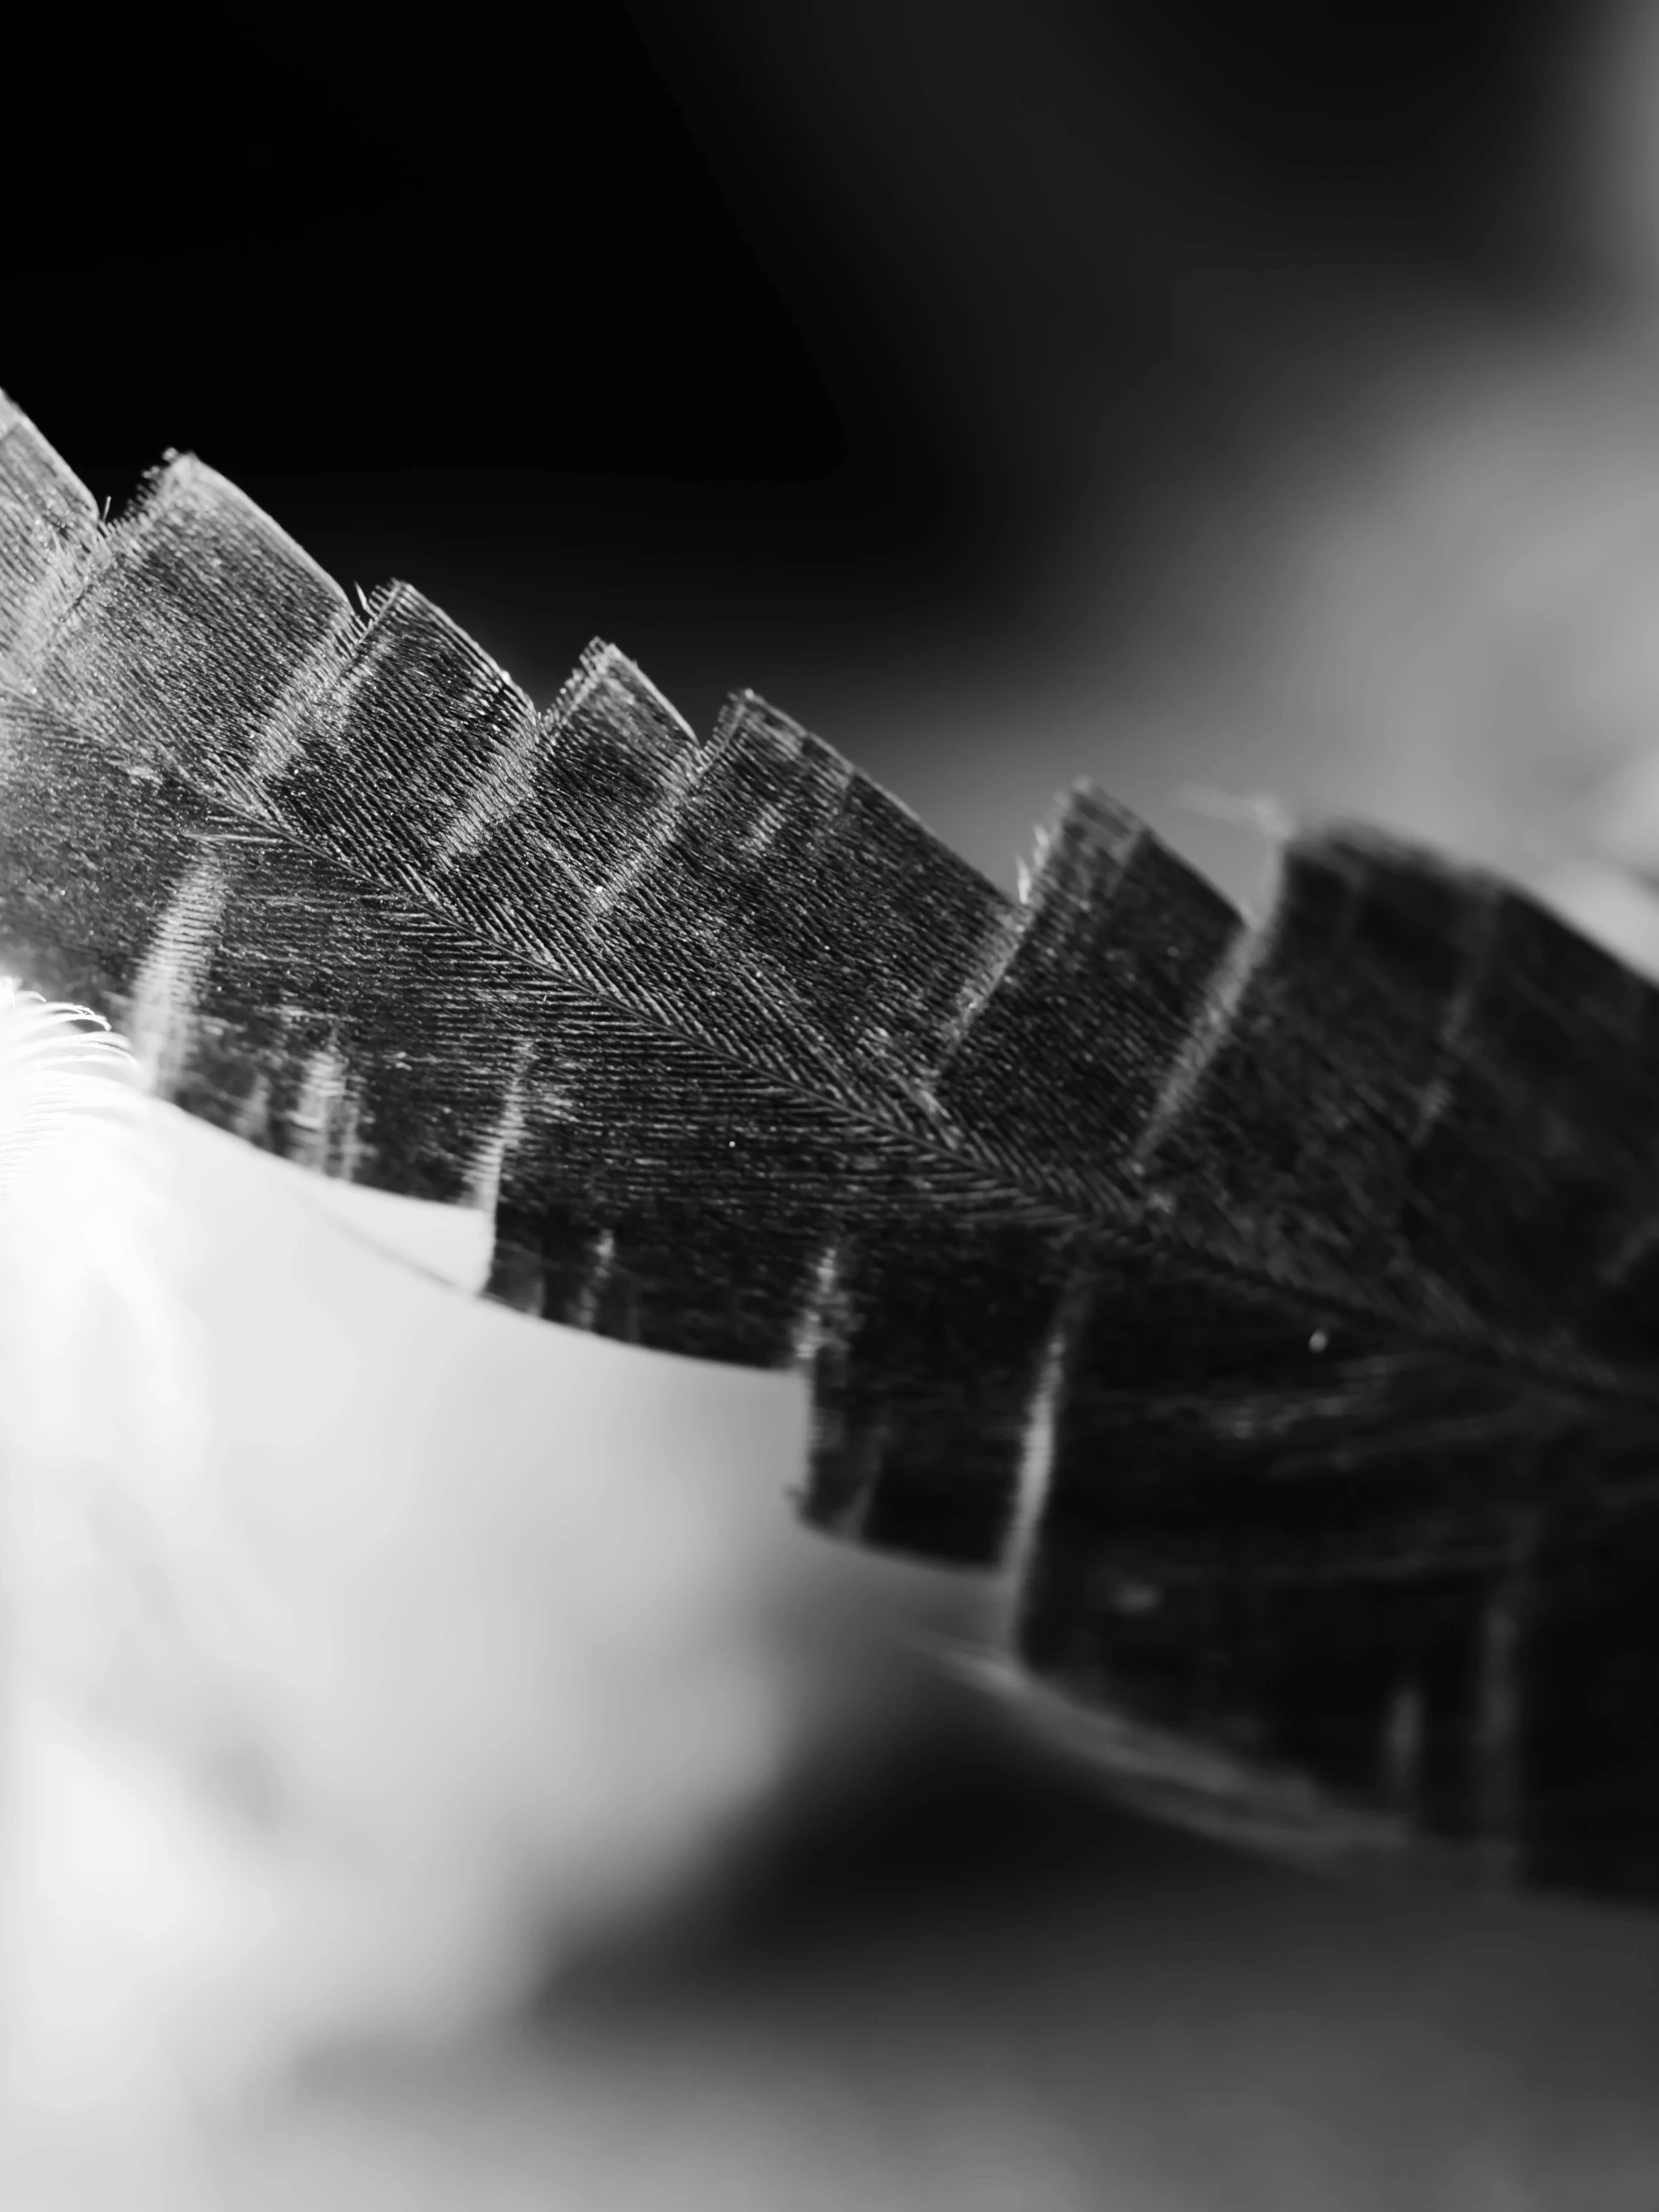 a feather is shown with white feathers, on a black background